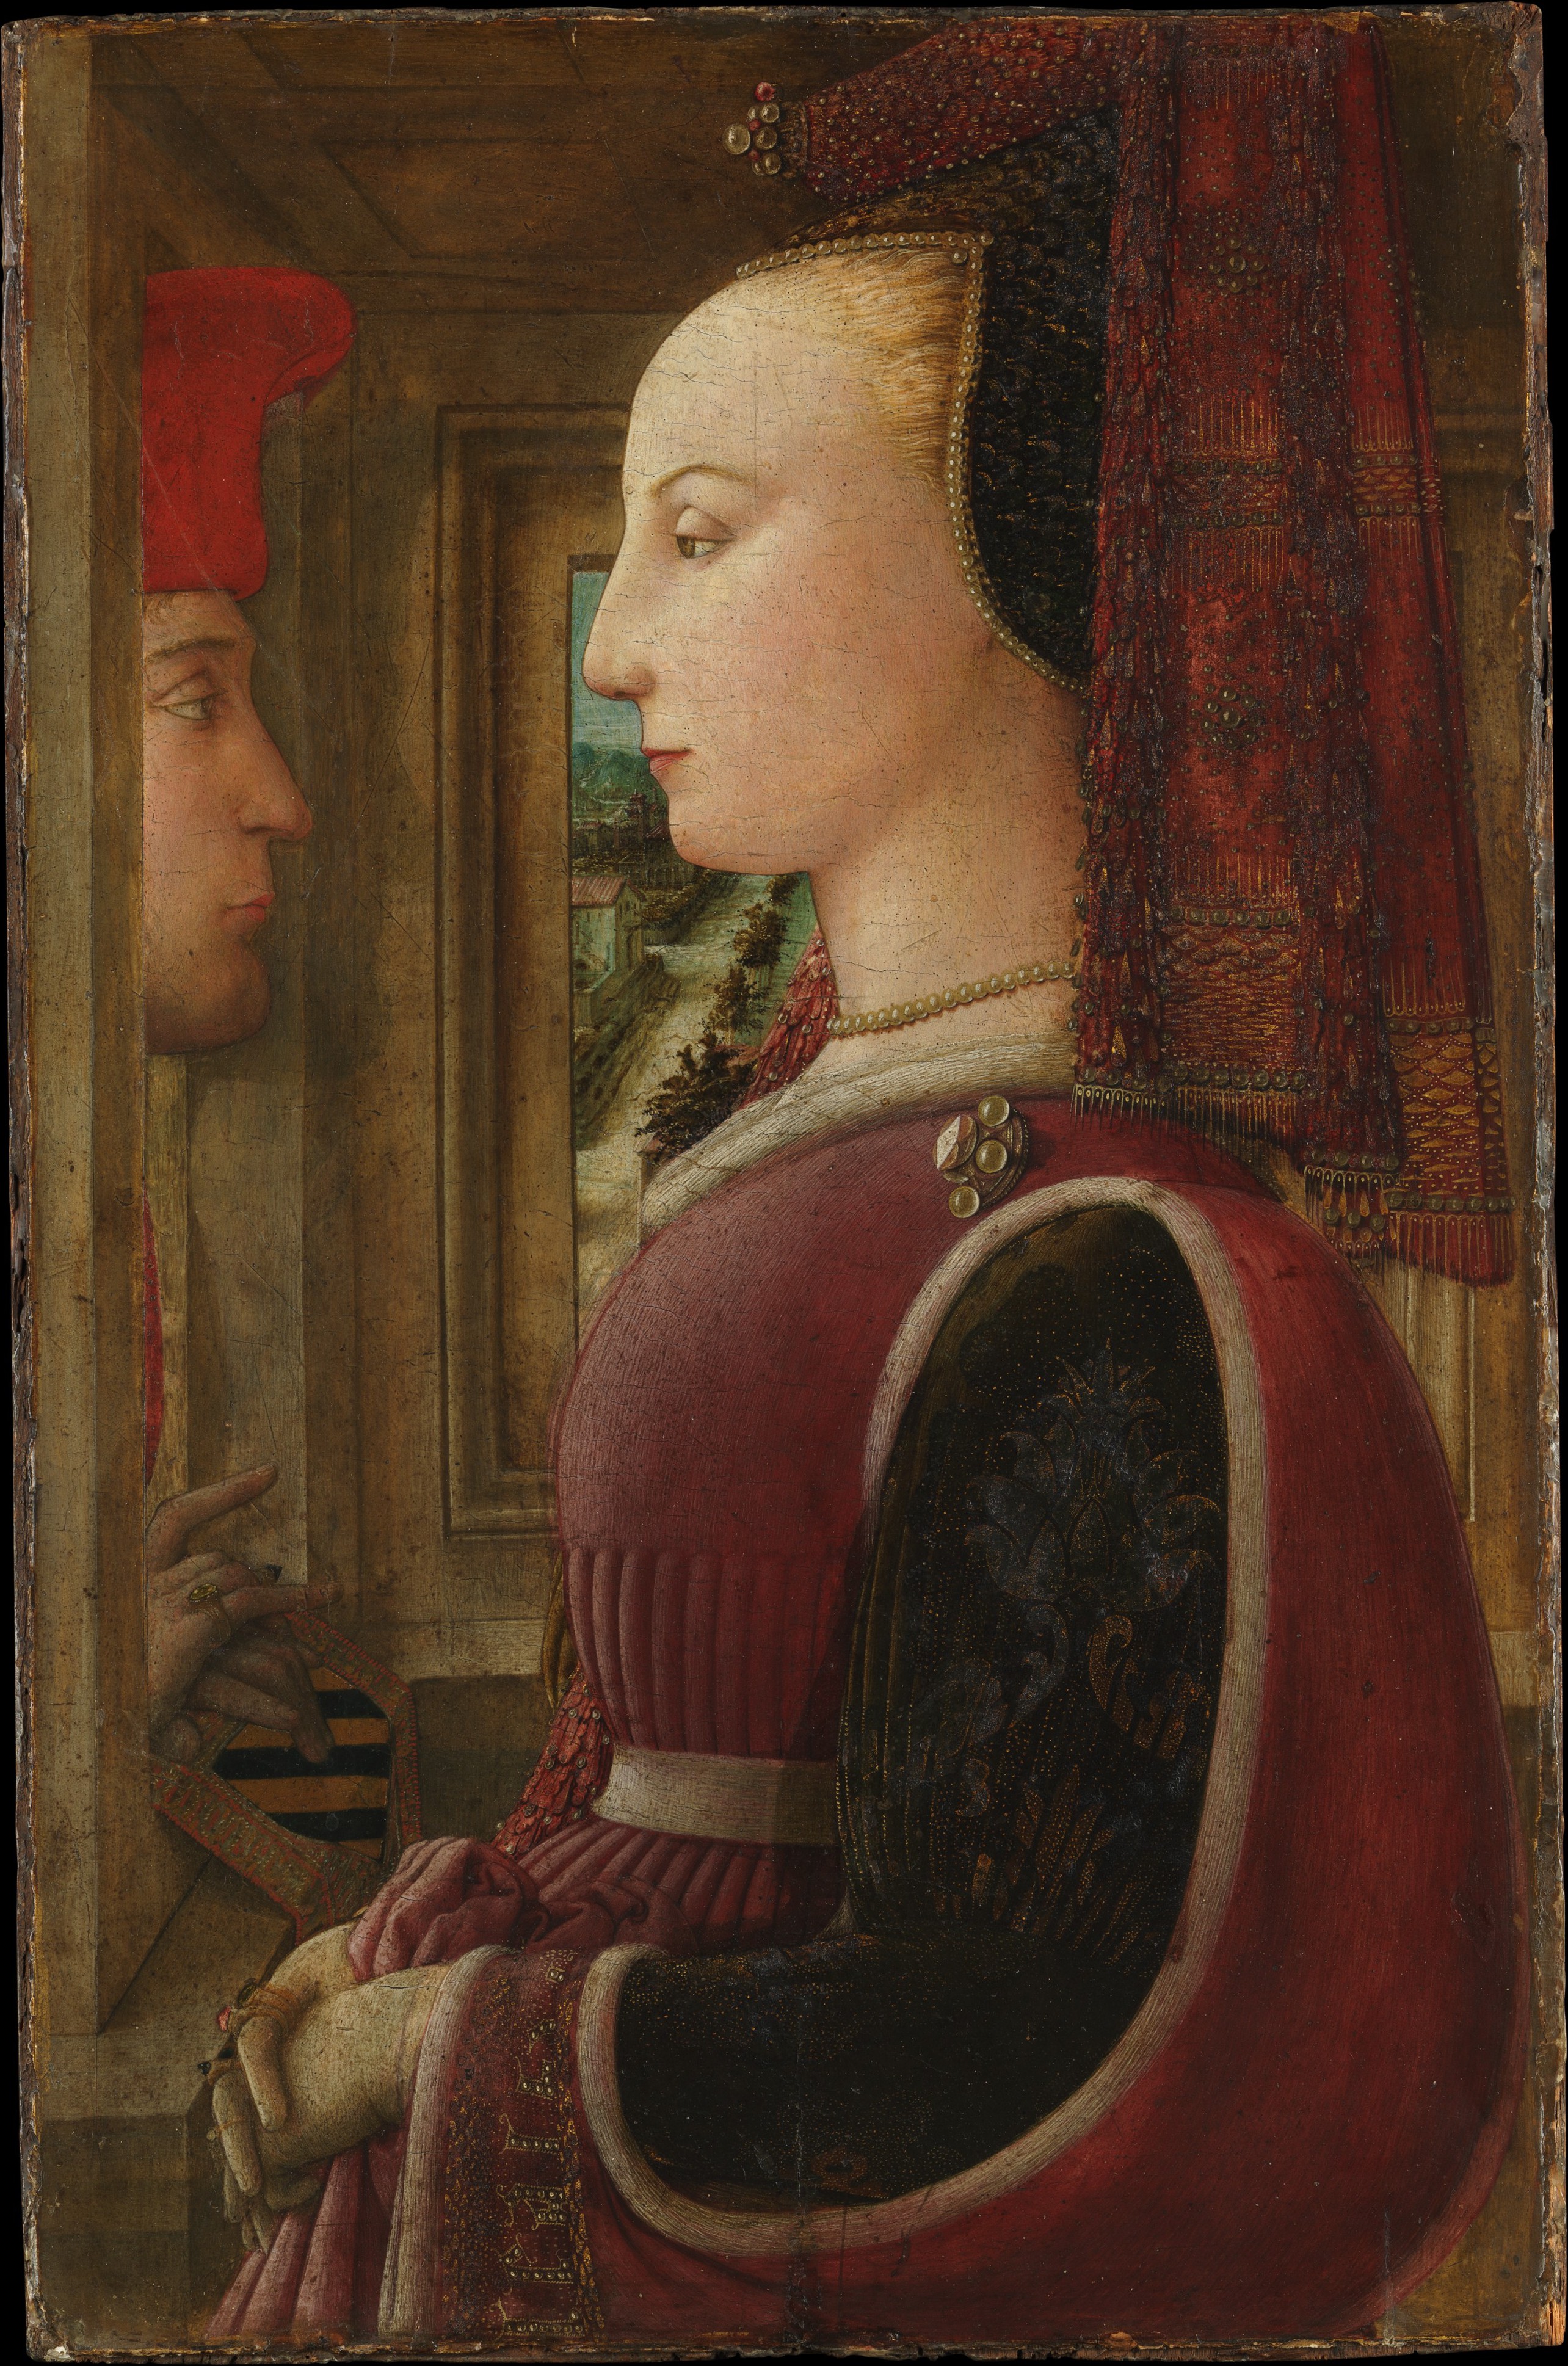 Portrait of a Woman with a Man at a Casement by Fra Filippo Lippi - c. 1440 - 64.1 x 41.9 cm Metropolitan Museum of Art